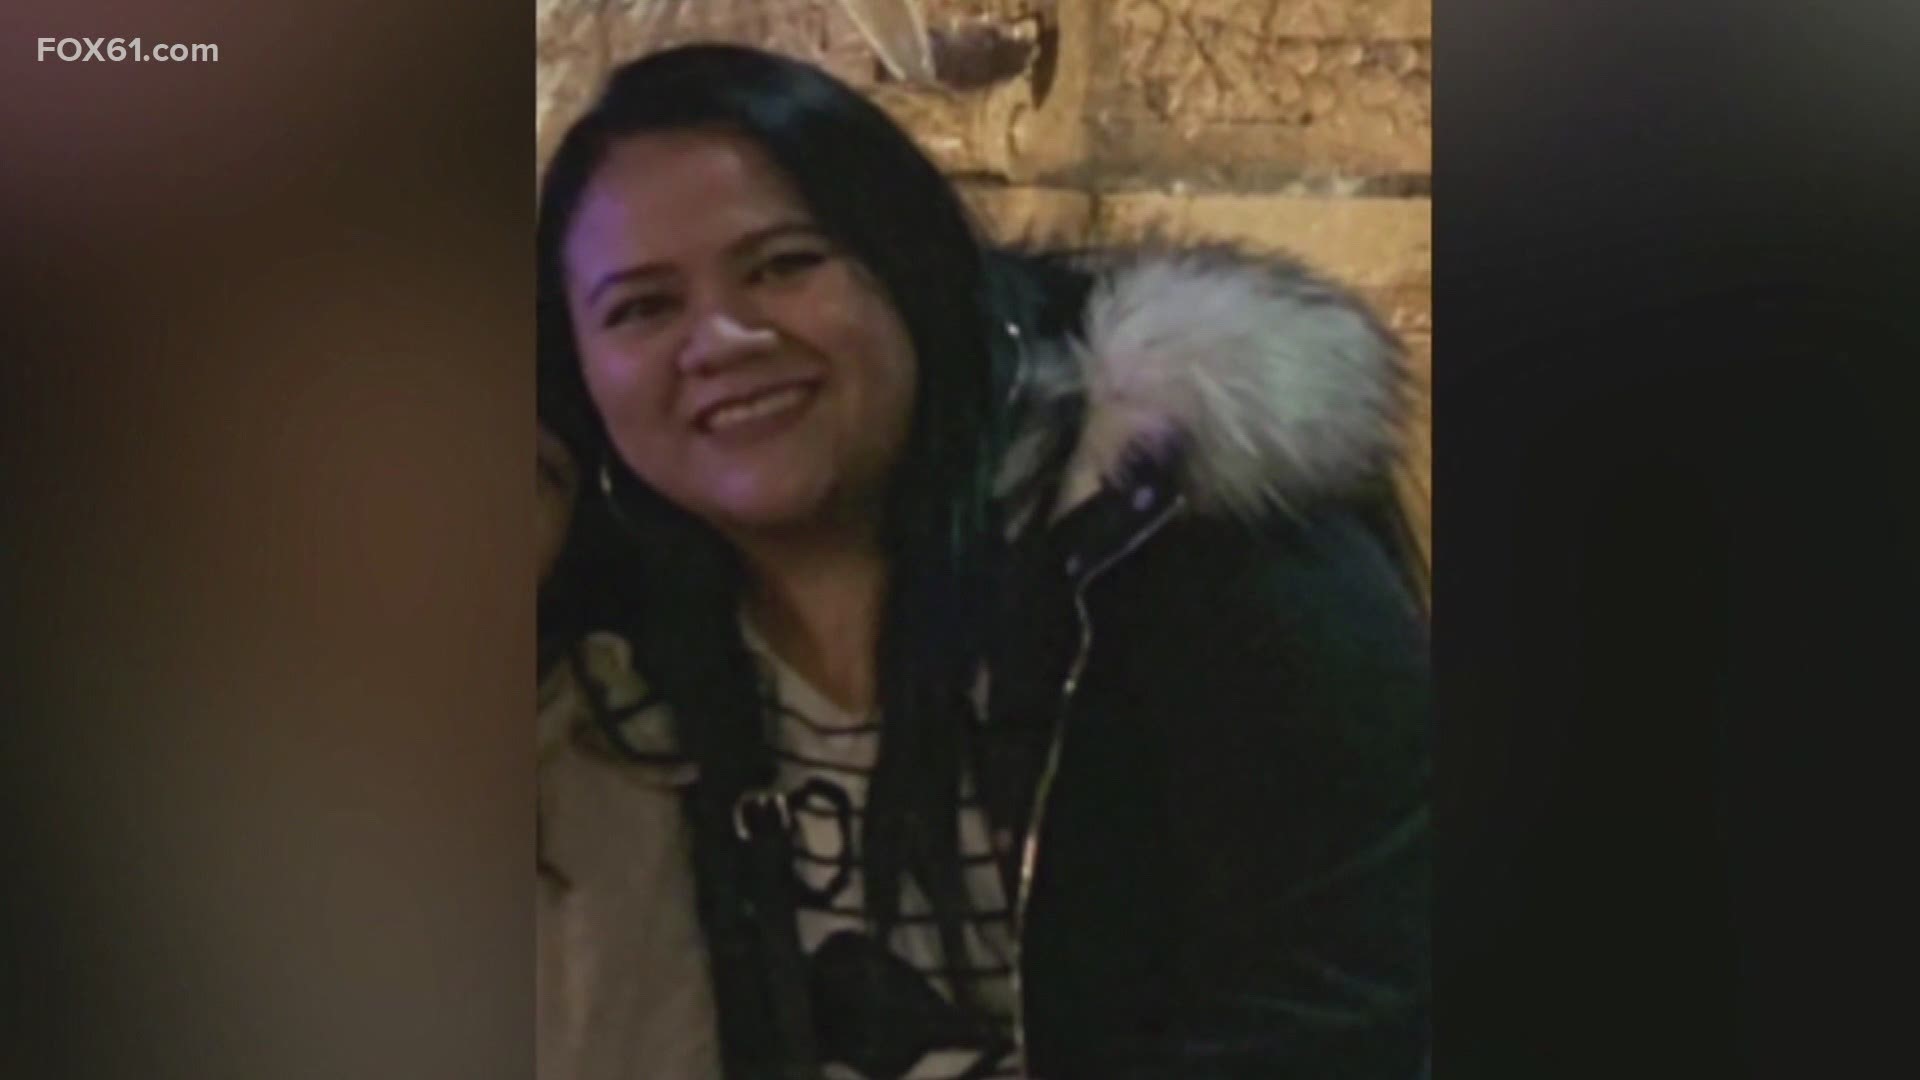 Lizzbeth Aleman-Popoca was found dead on July 15th, behind the dumpsters at Branford restaurant where her husband worked. No arrests have been made.